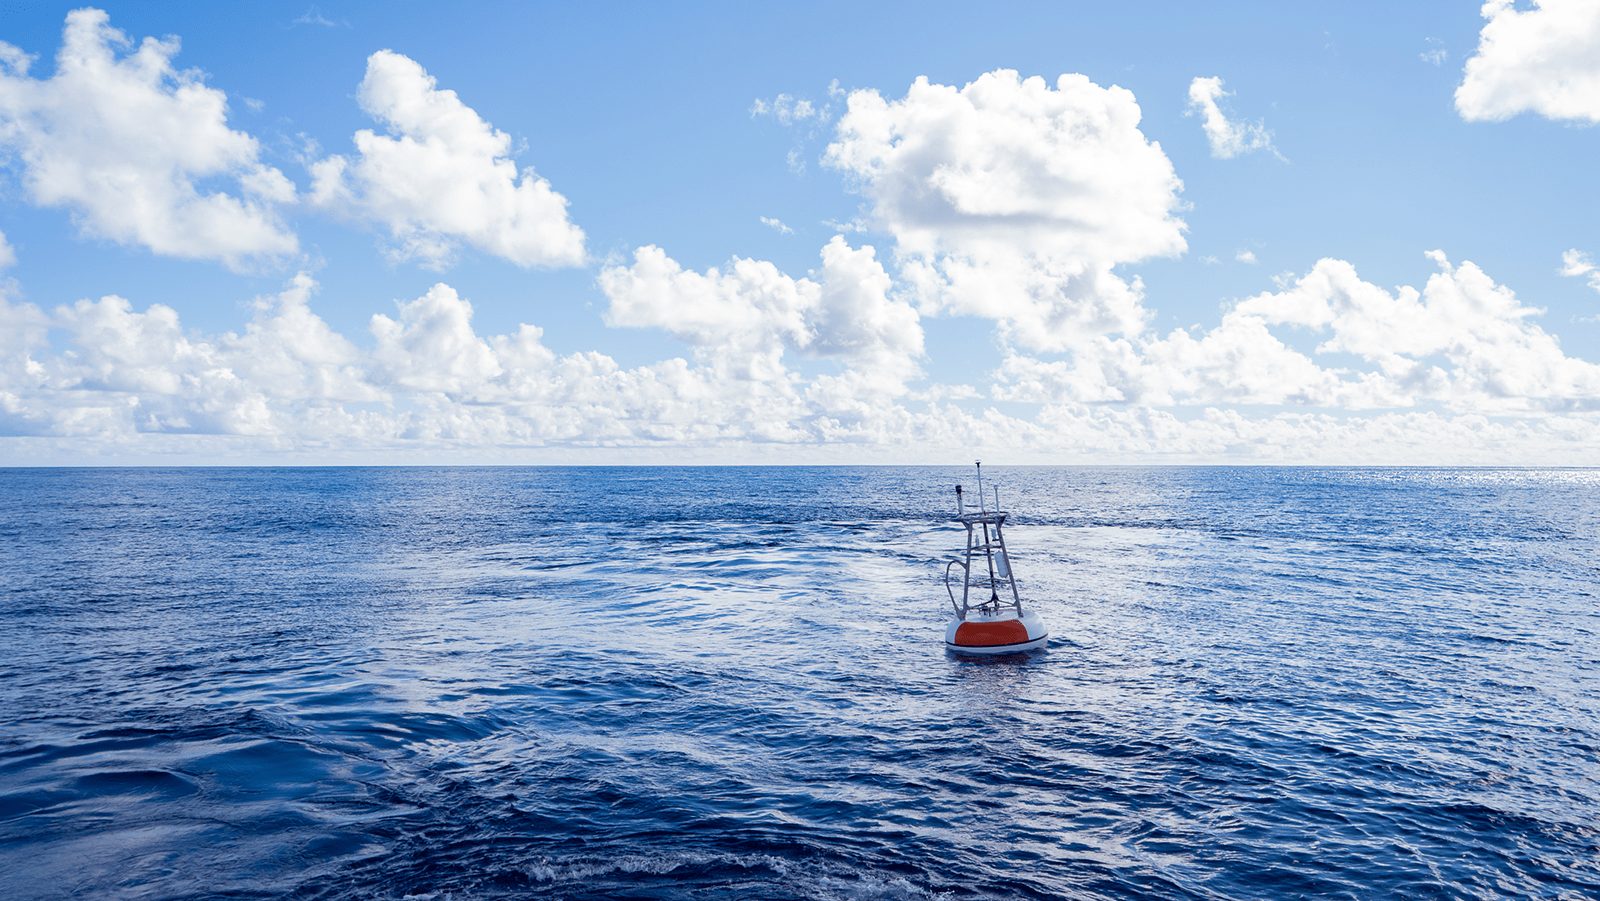 A large red and white buoy floats in the open ocean.